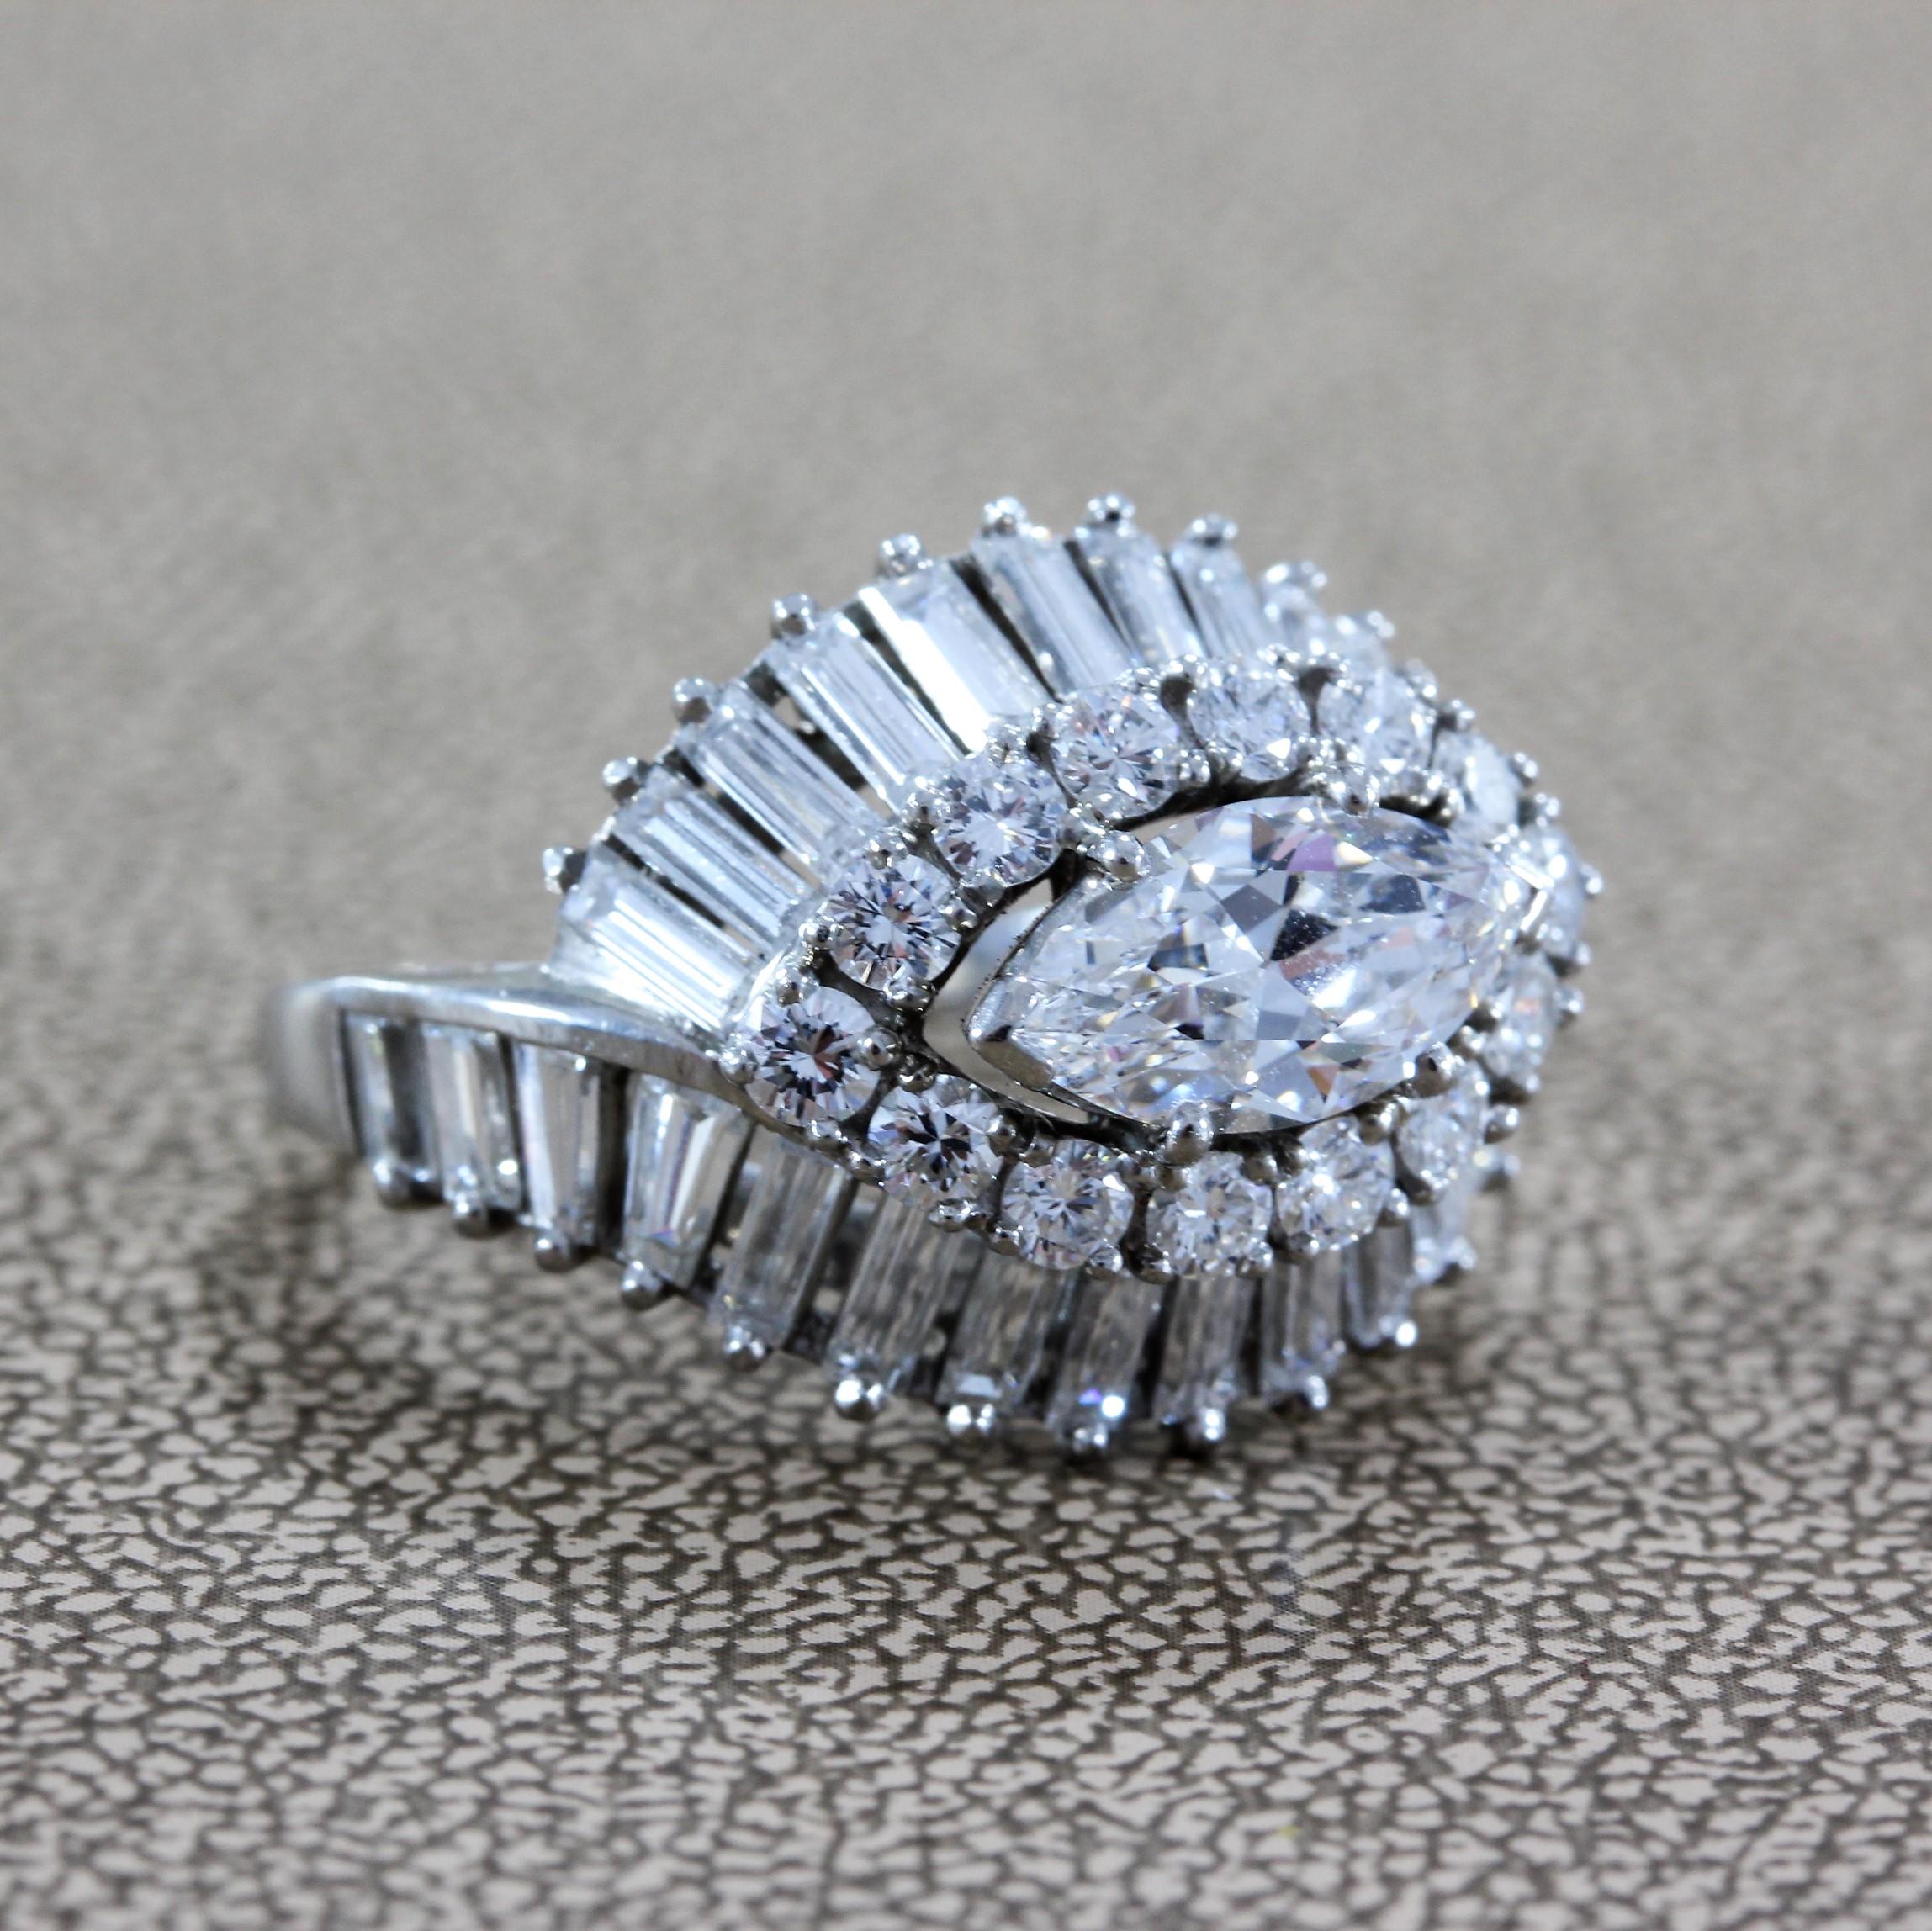 An elegant diamond ring by Oscar Heyman featuring a 1.35 carat marquise shape diamond, with a halo of round cut diamonds and baguettes running along the top and bottom. Set in platinum.
 
Ring Size 7 